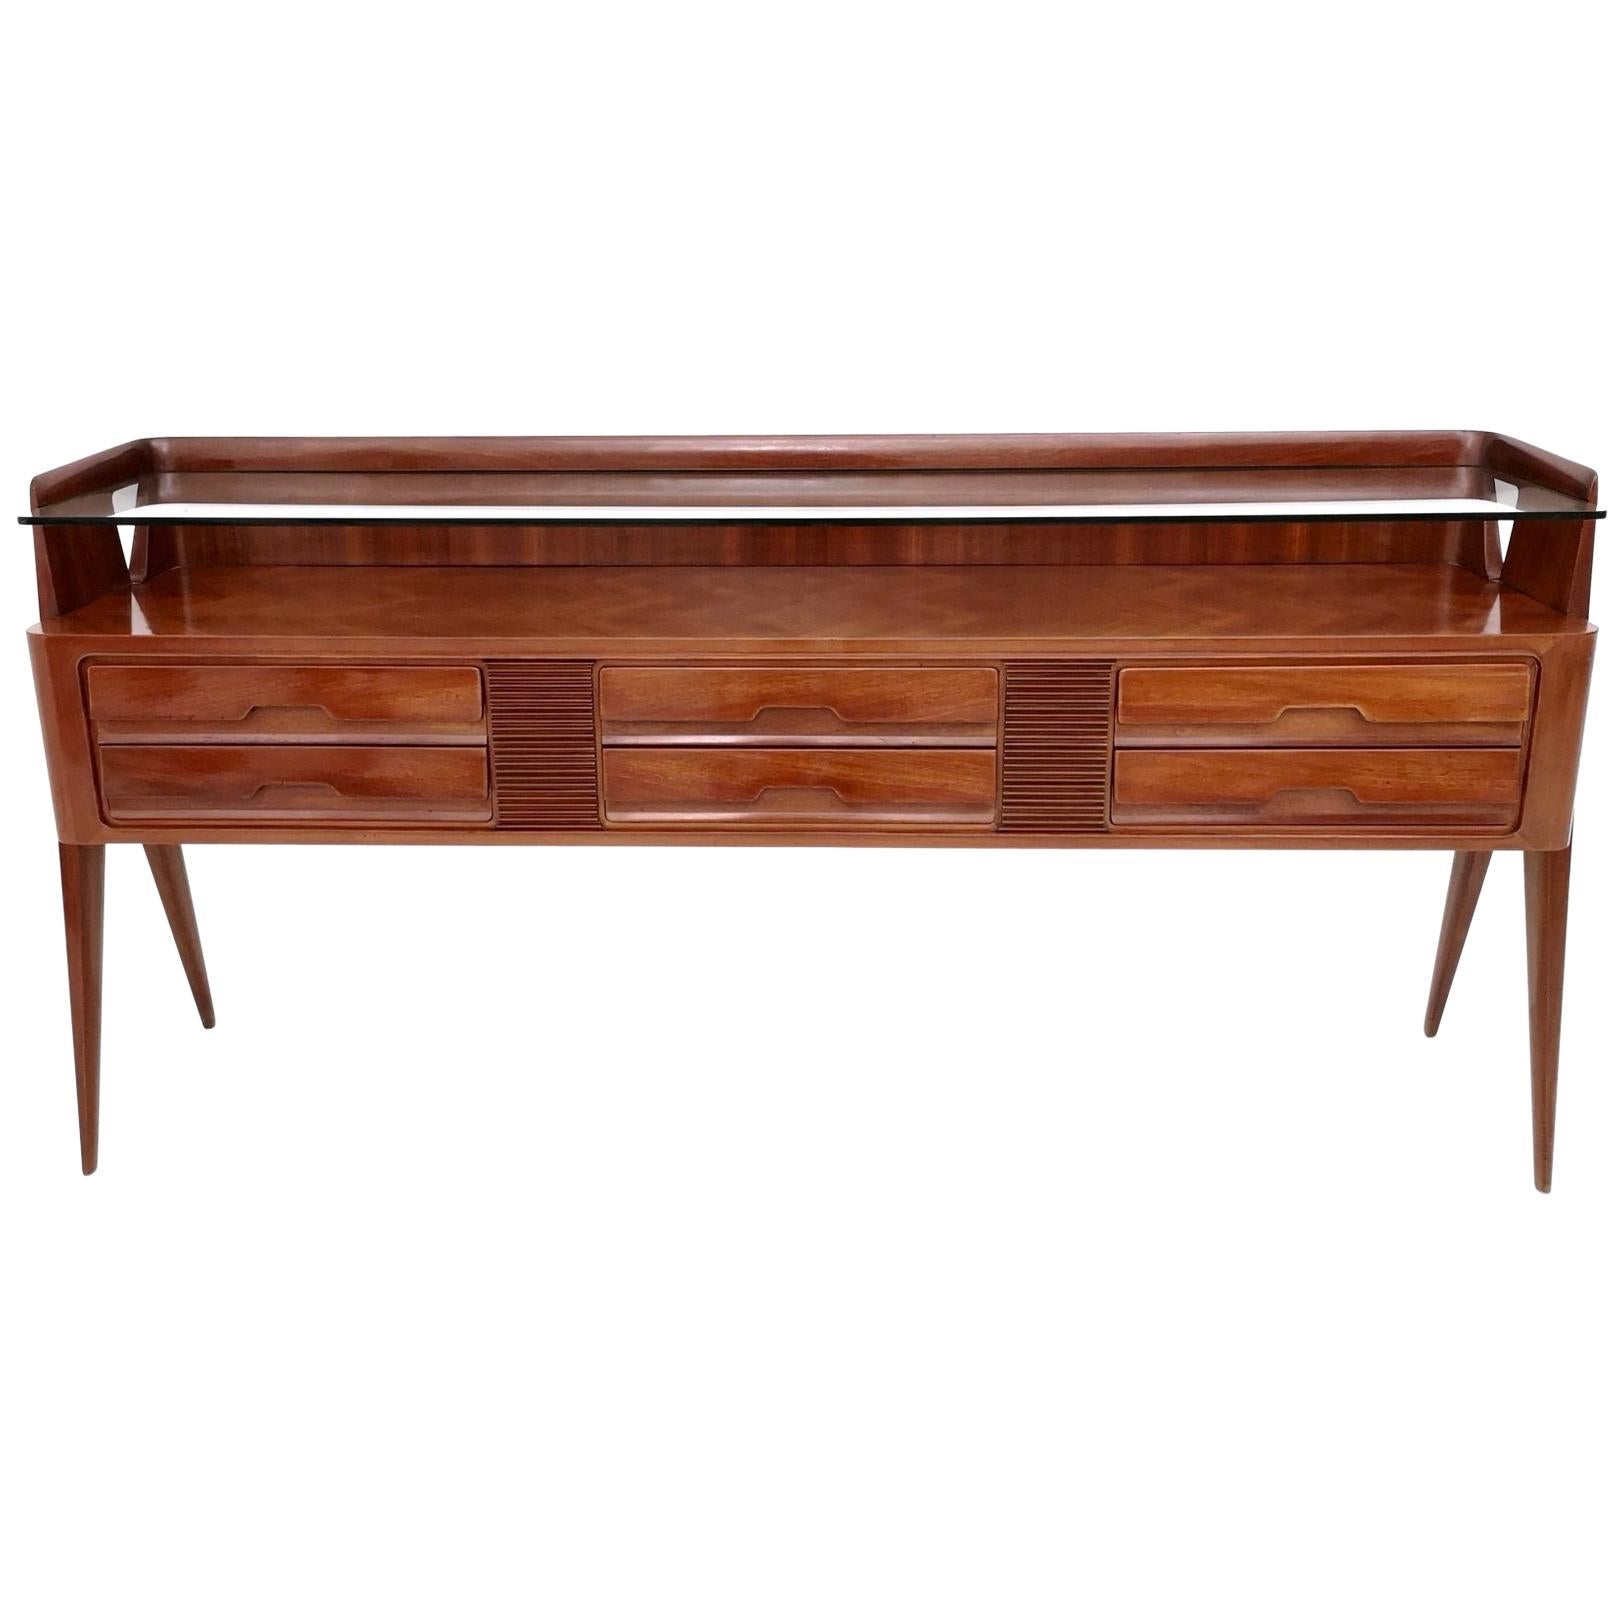 High-Quality Wooden Dresser by La Permanente Mobili Cantù, Italy, 1950s